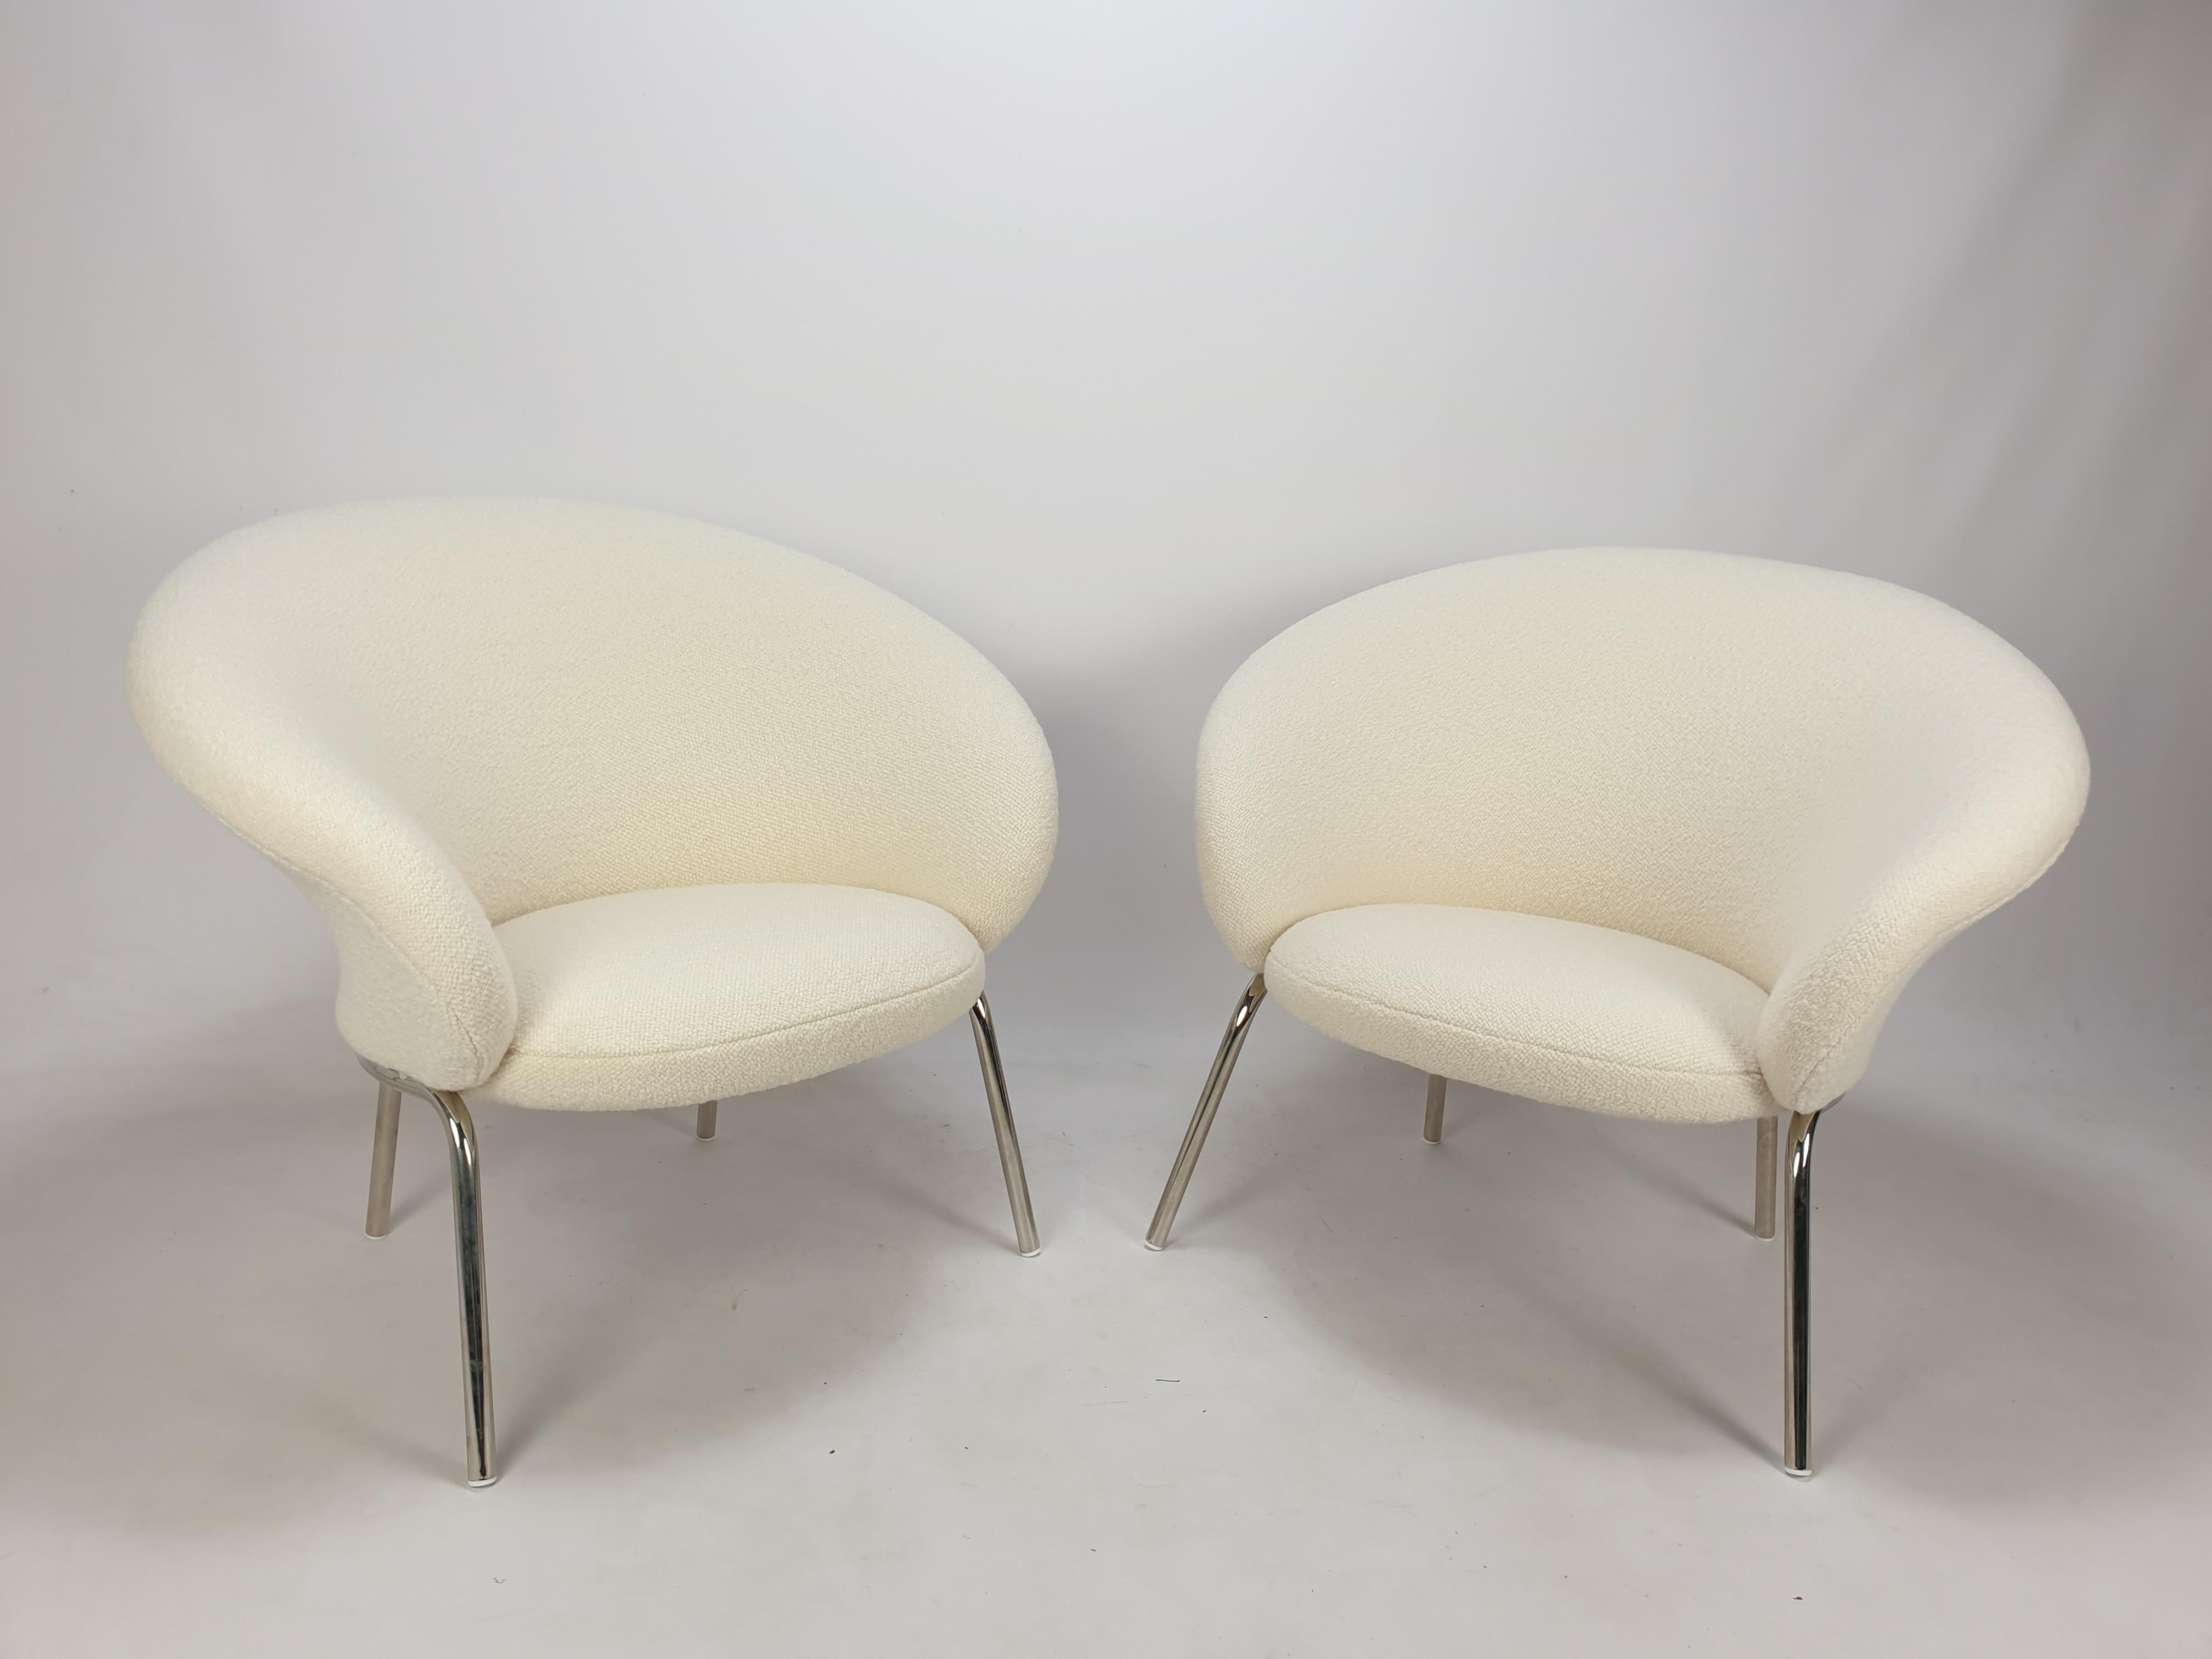 Very rare set of lounge chairs, model F570.
Designed by Pierre Paulin in 1963 and manufactured by Artifort.

This beautiful model was produced for just a very short time, 1 year, and is documented in several books by Pierre Paulin.
It is a